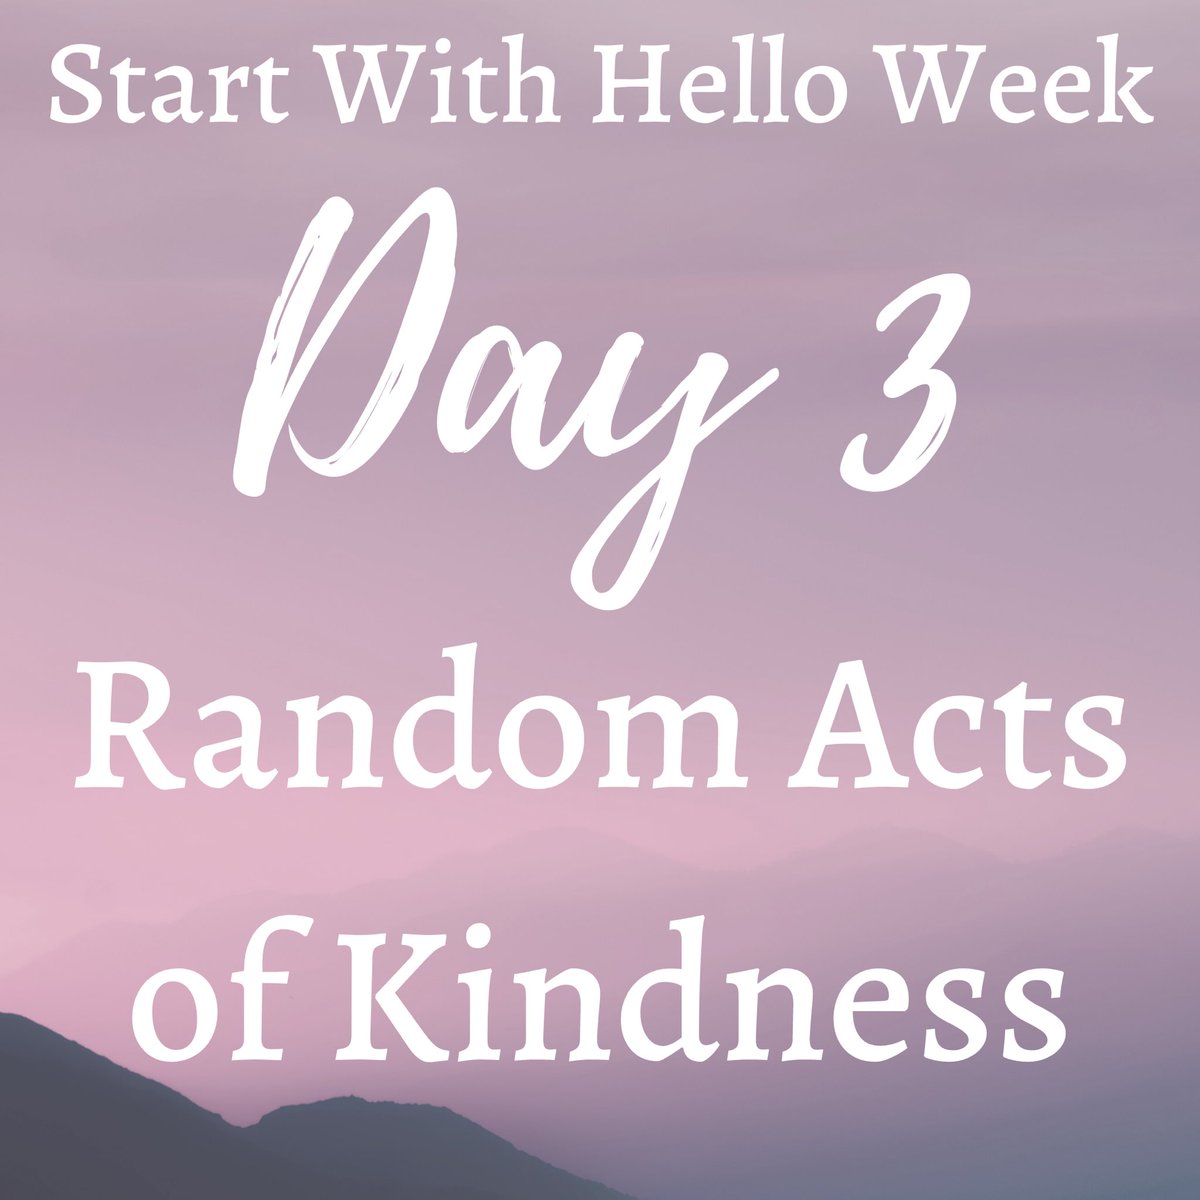 Here is our Day 3 challenge for #startwithhelloweek Show a random act of kindness to one (or more!) people. Wether it be holding a door open or helping to lift someone’s spirits, no act of kindness is too small!😊 #sandyhookpromise #savepromiseclub